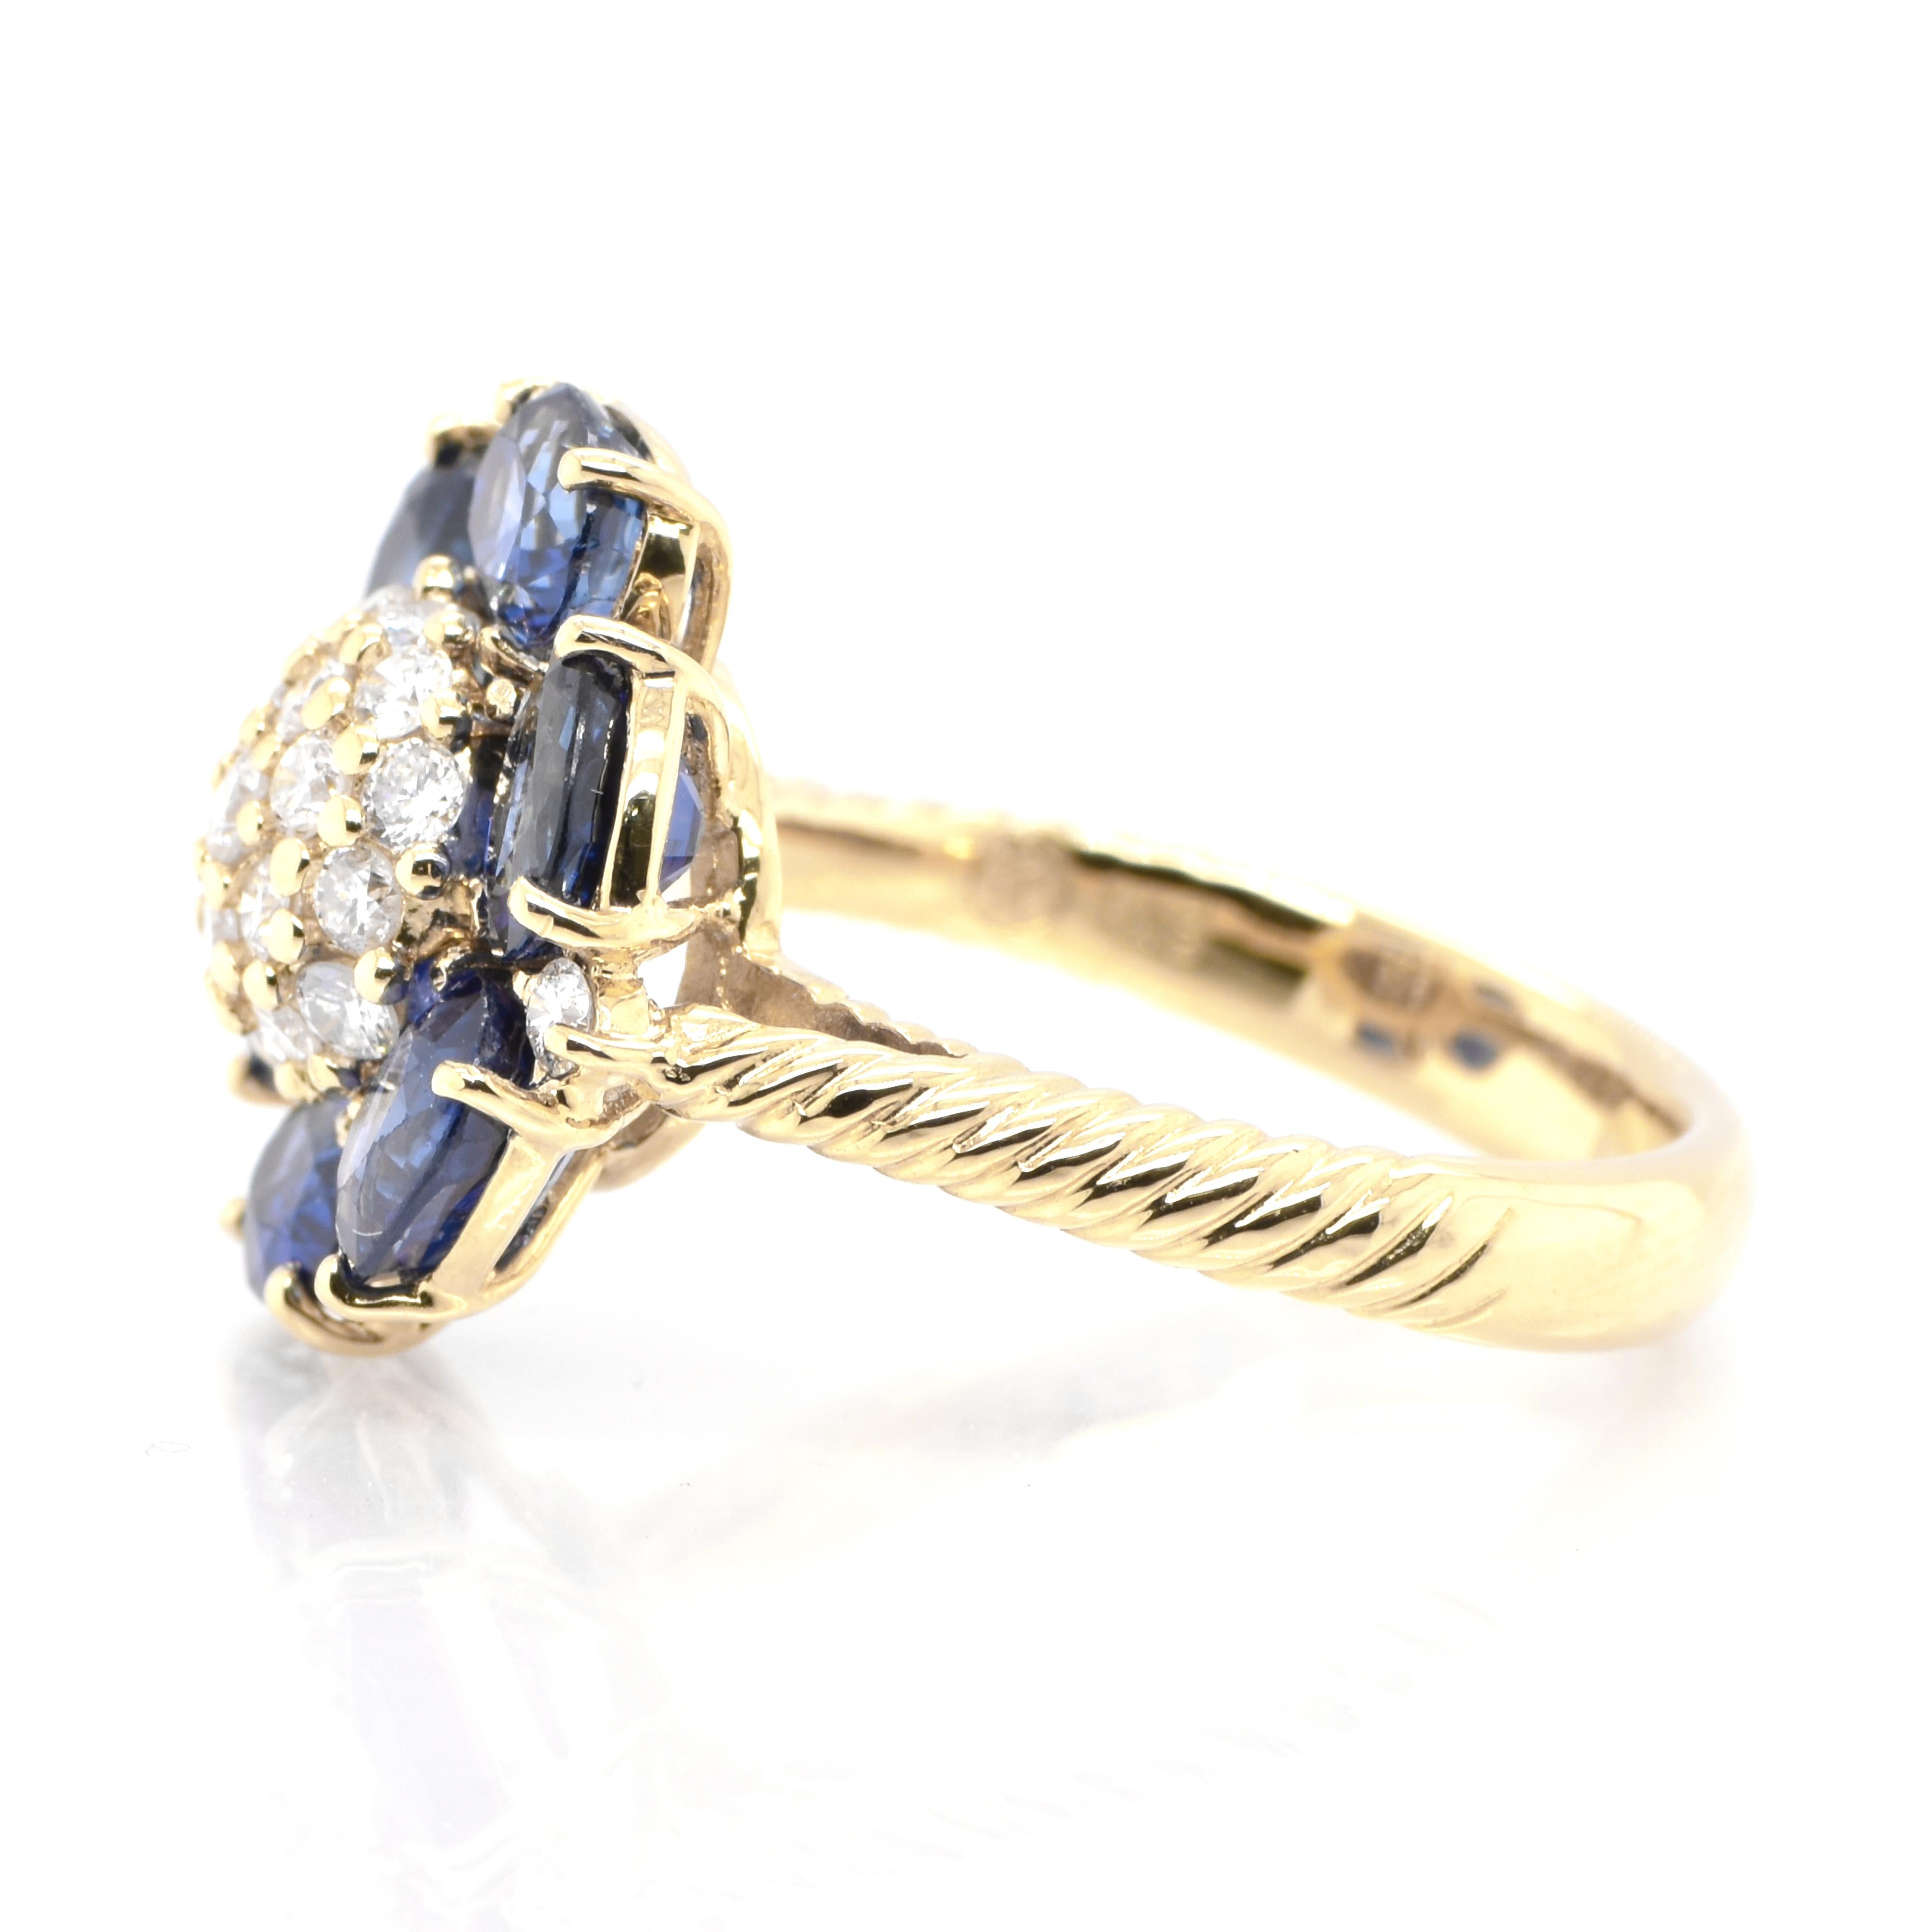 Oval Cut 3.46 Carat Natural Sapphire and Diamond Cluster Ring Set in 18K Yellow Gold For Sale